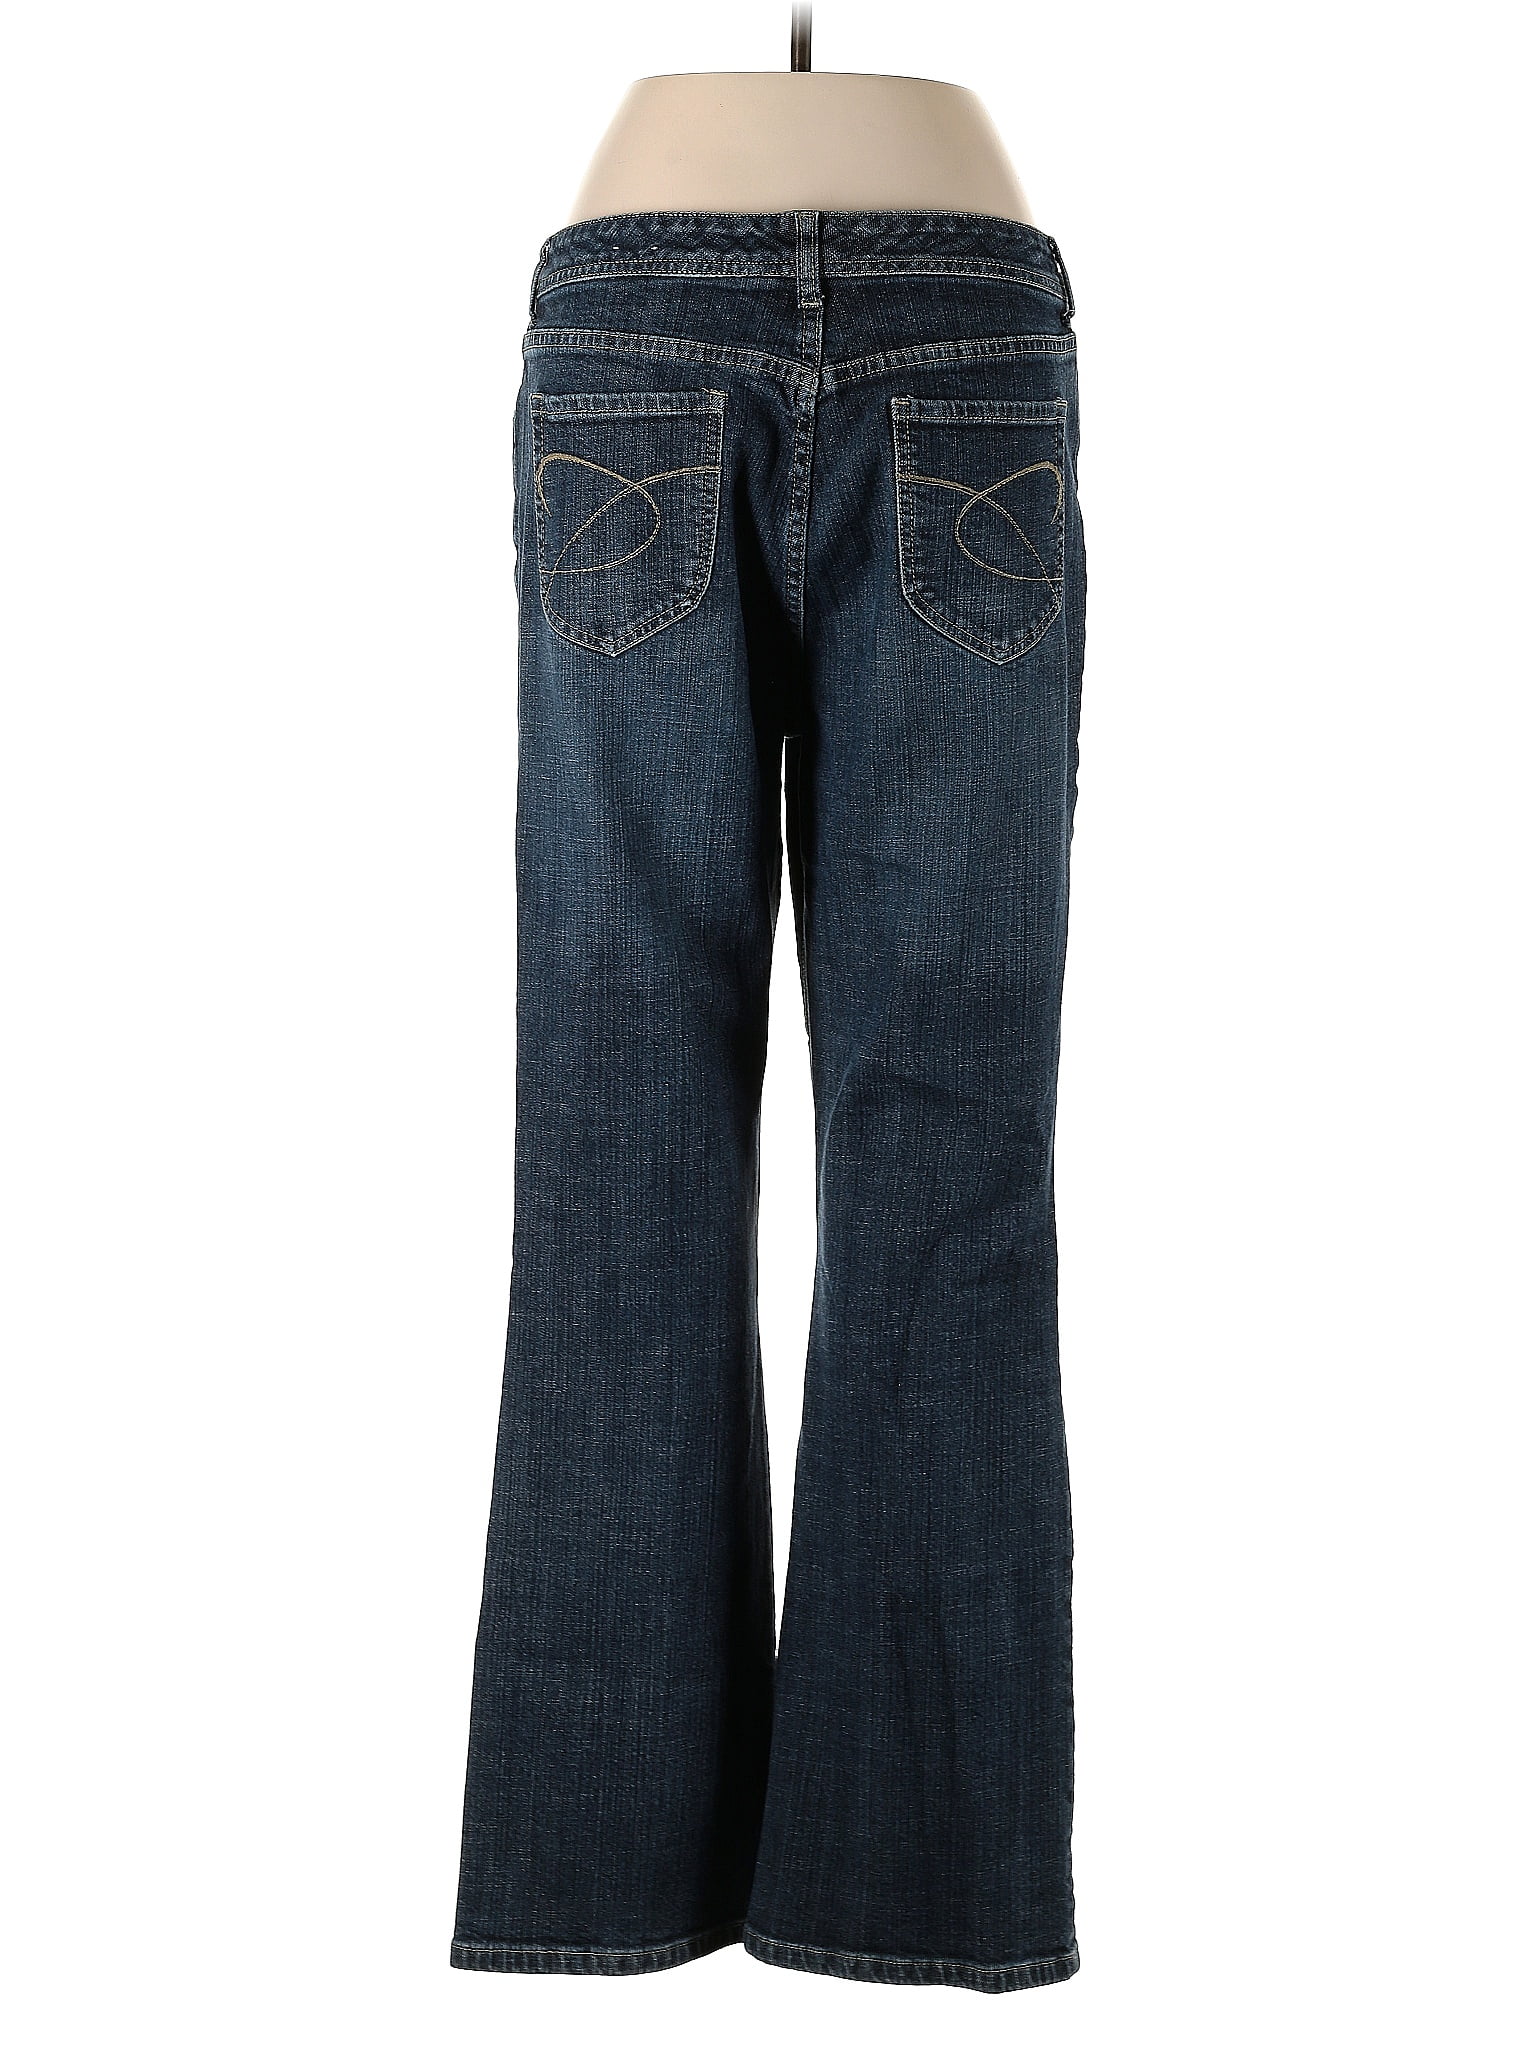 Zenergy by Chico's Blue Casual Pants Size Lg (2) - 75% off